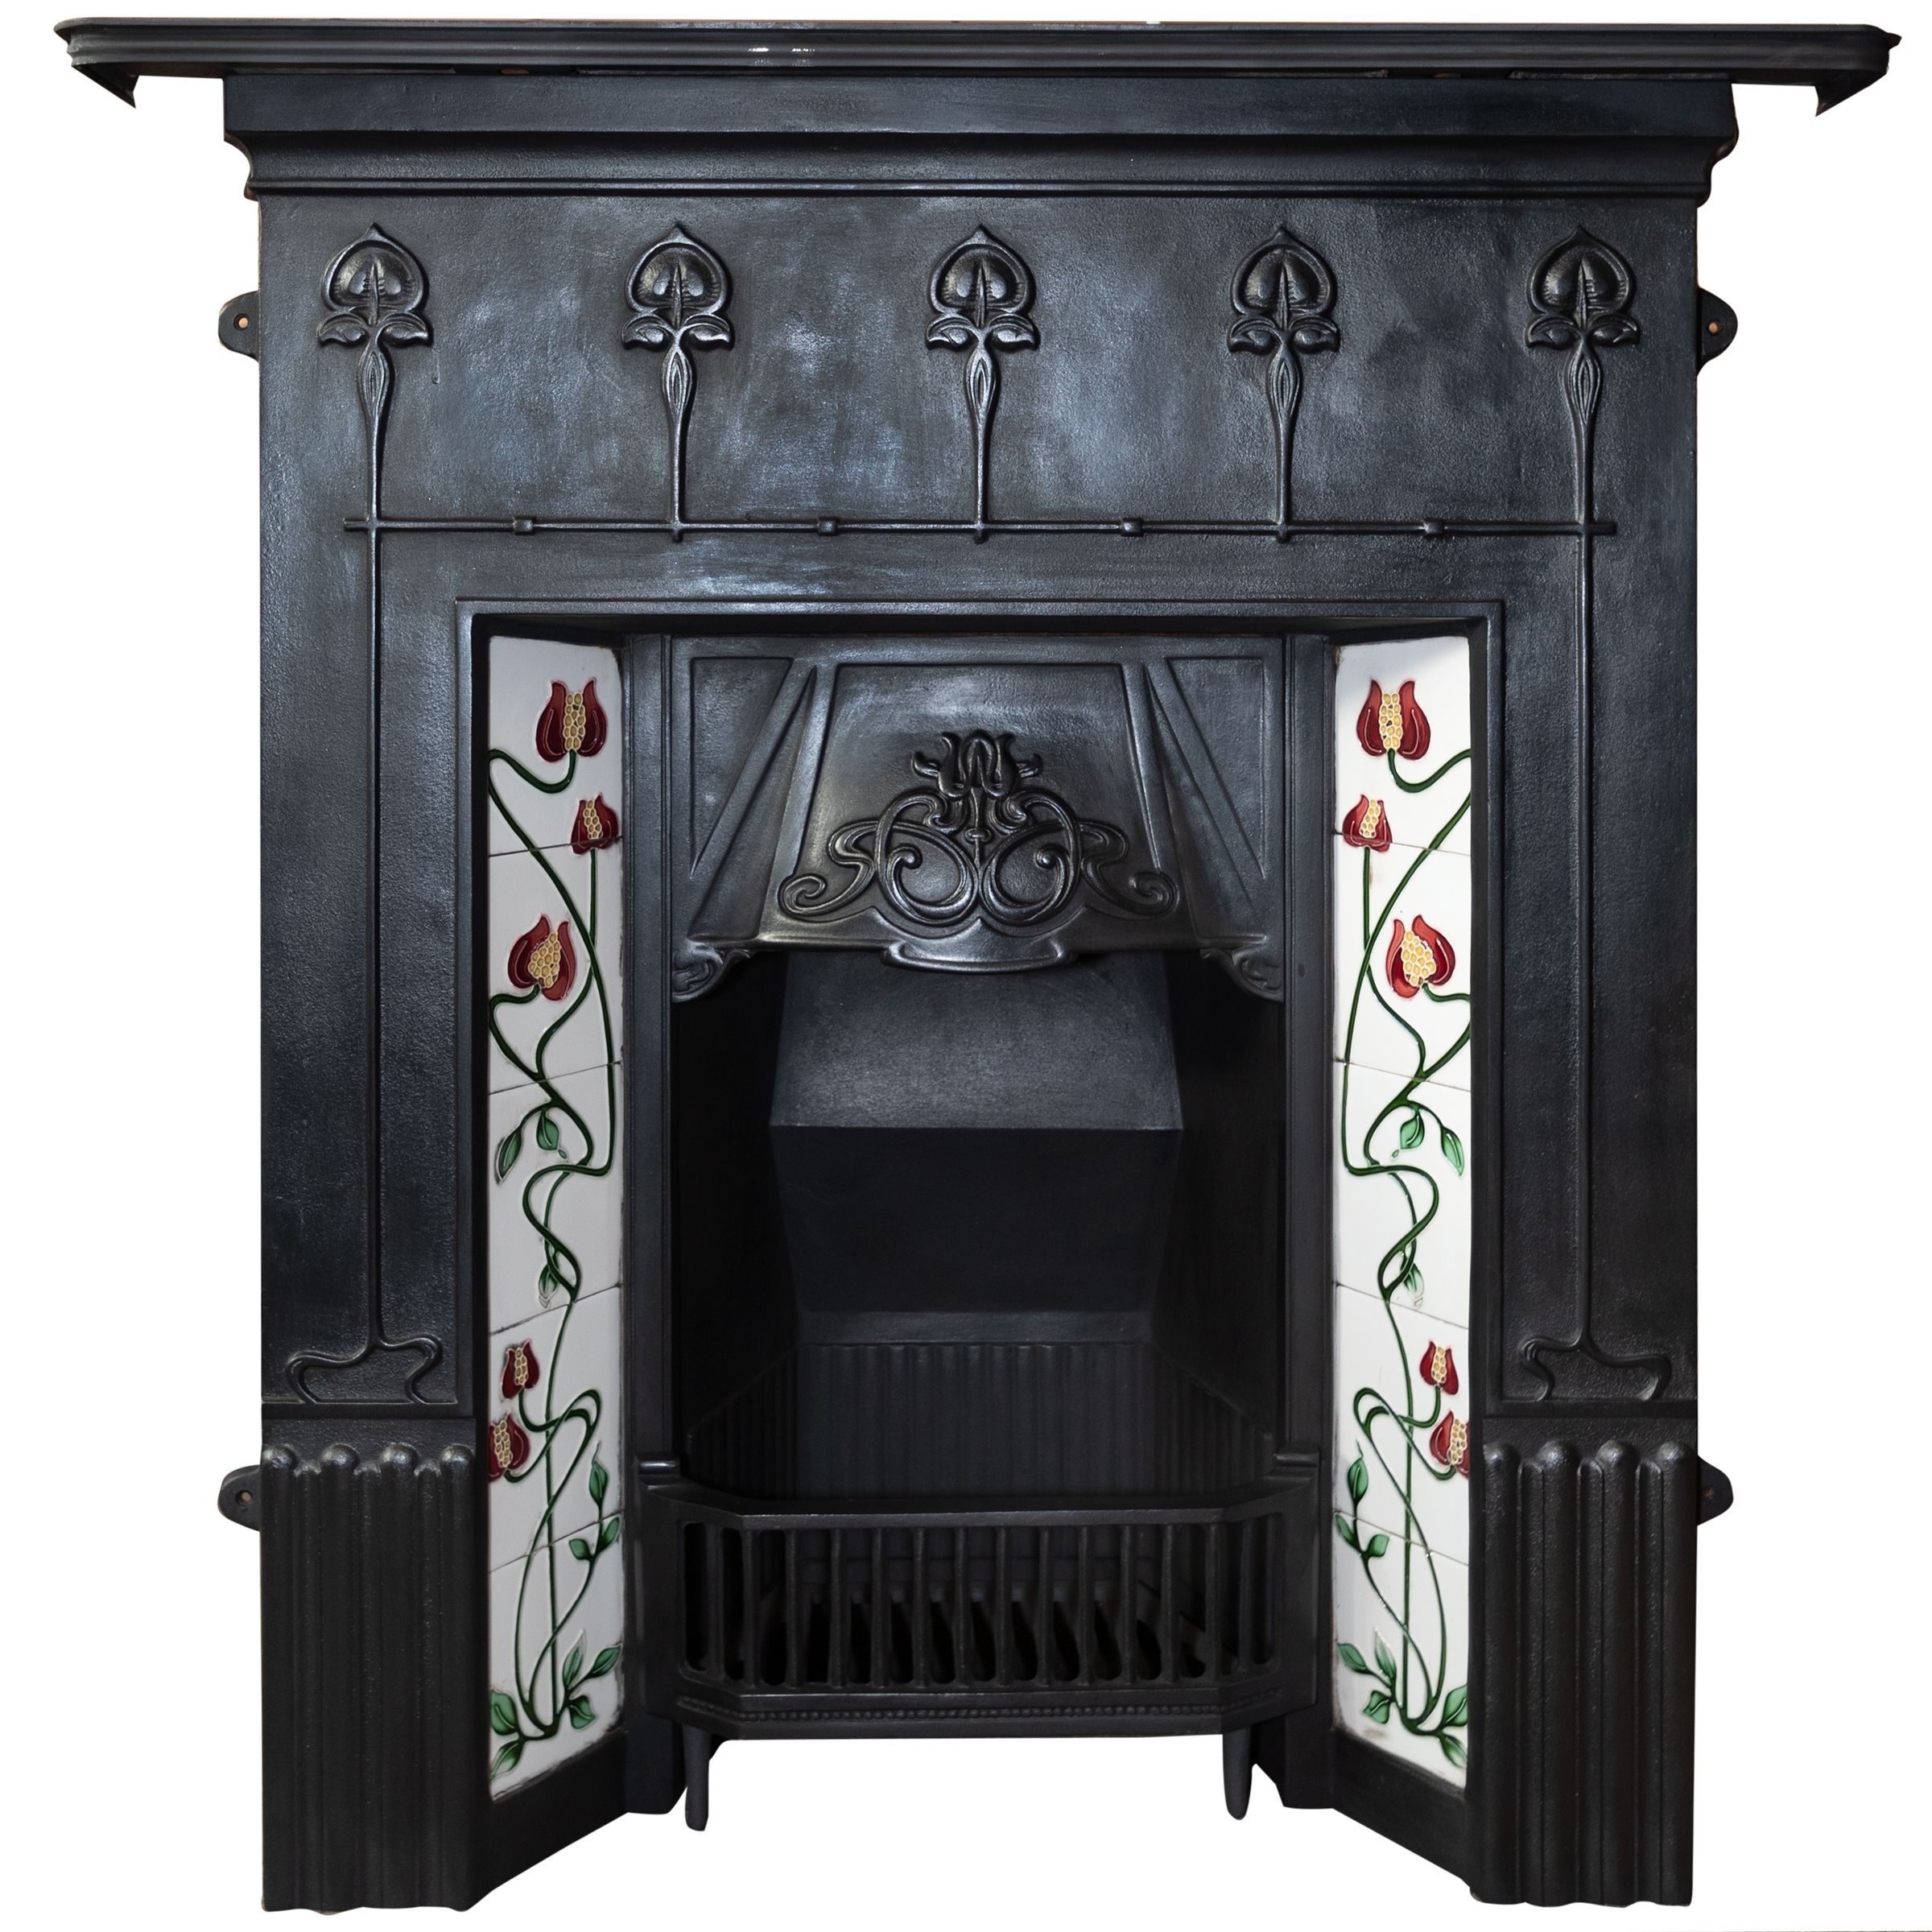 Vertical Fireplace Elegant Huge Selection Of Antique Cast Iron Fireplaces Fully